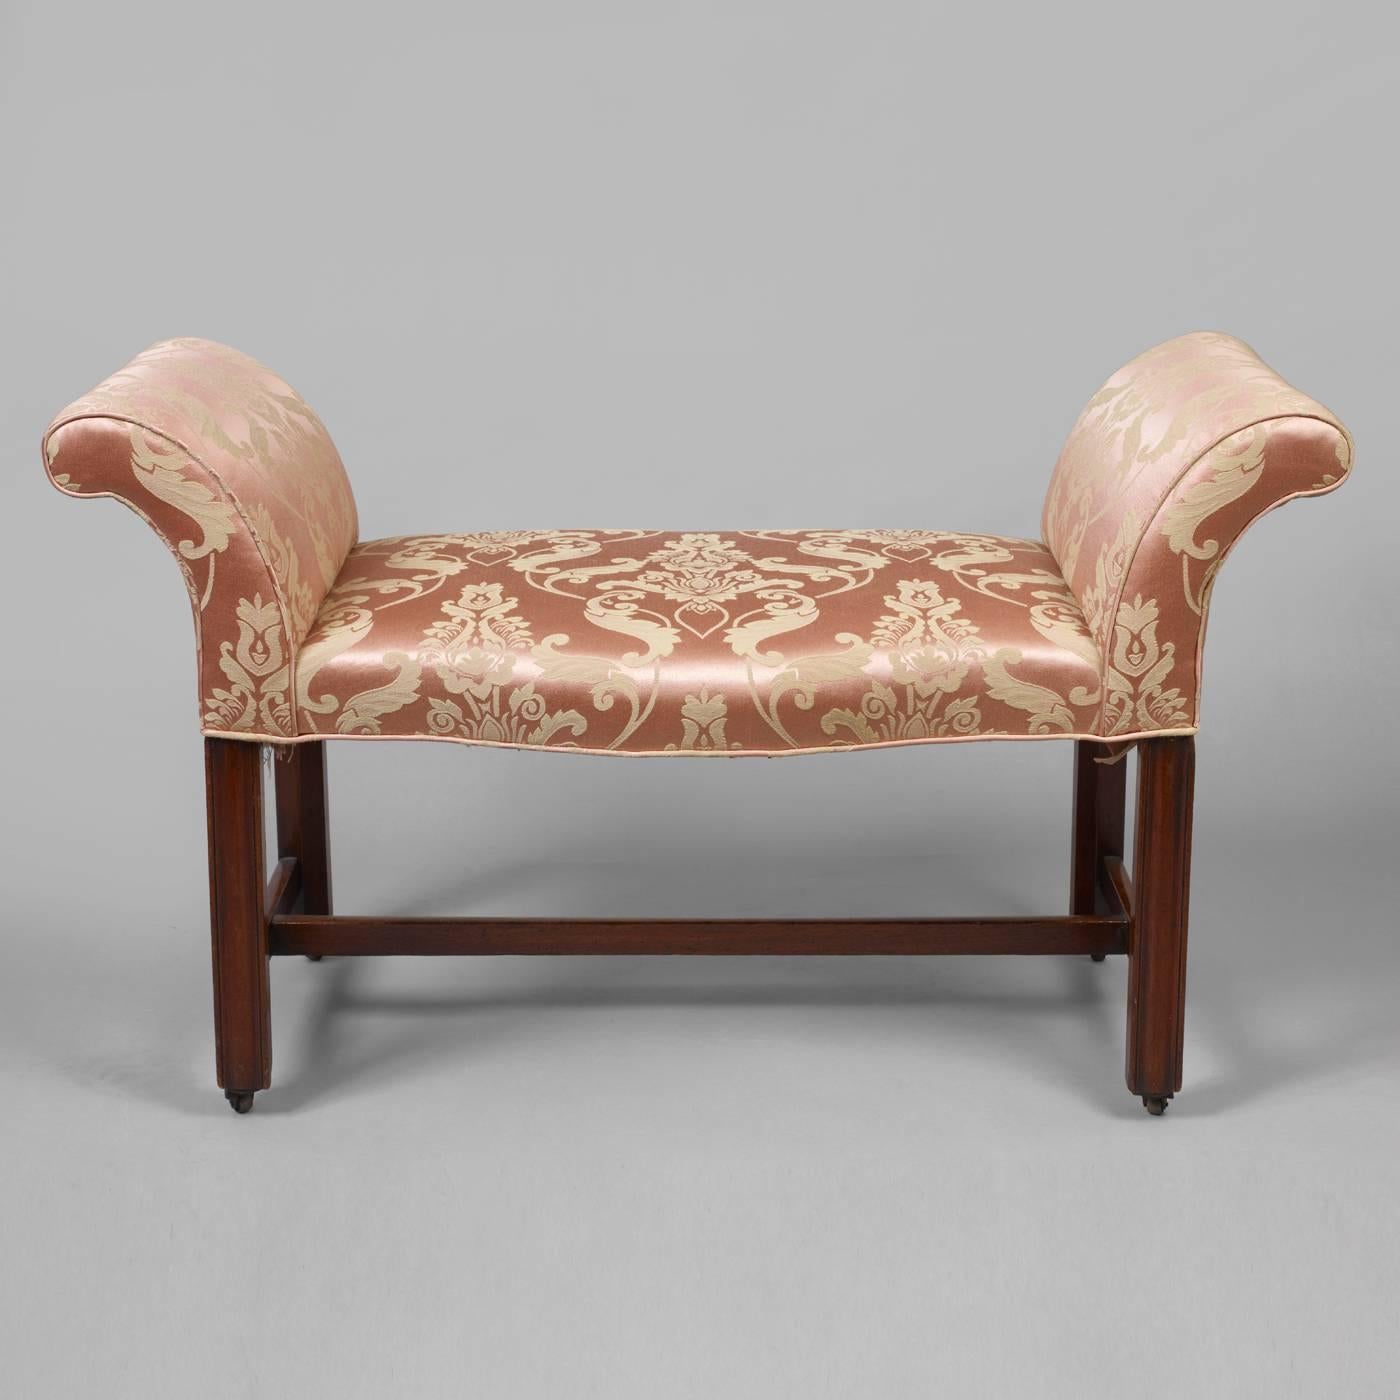 English, circa 1770-1790.
Mahogany, hardwood frame and supports.
The elegantly proportioned form having scrolled arms with a serpentine front is supported by finely carved molded legs with a stretcher base ending on casters.
Condition: Excellent